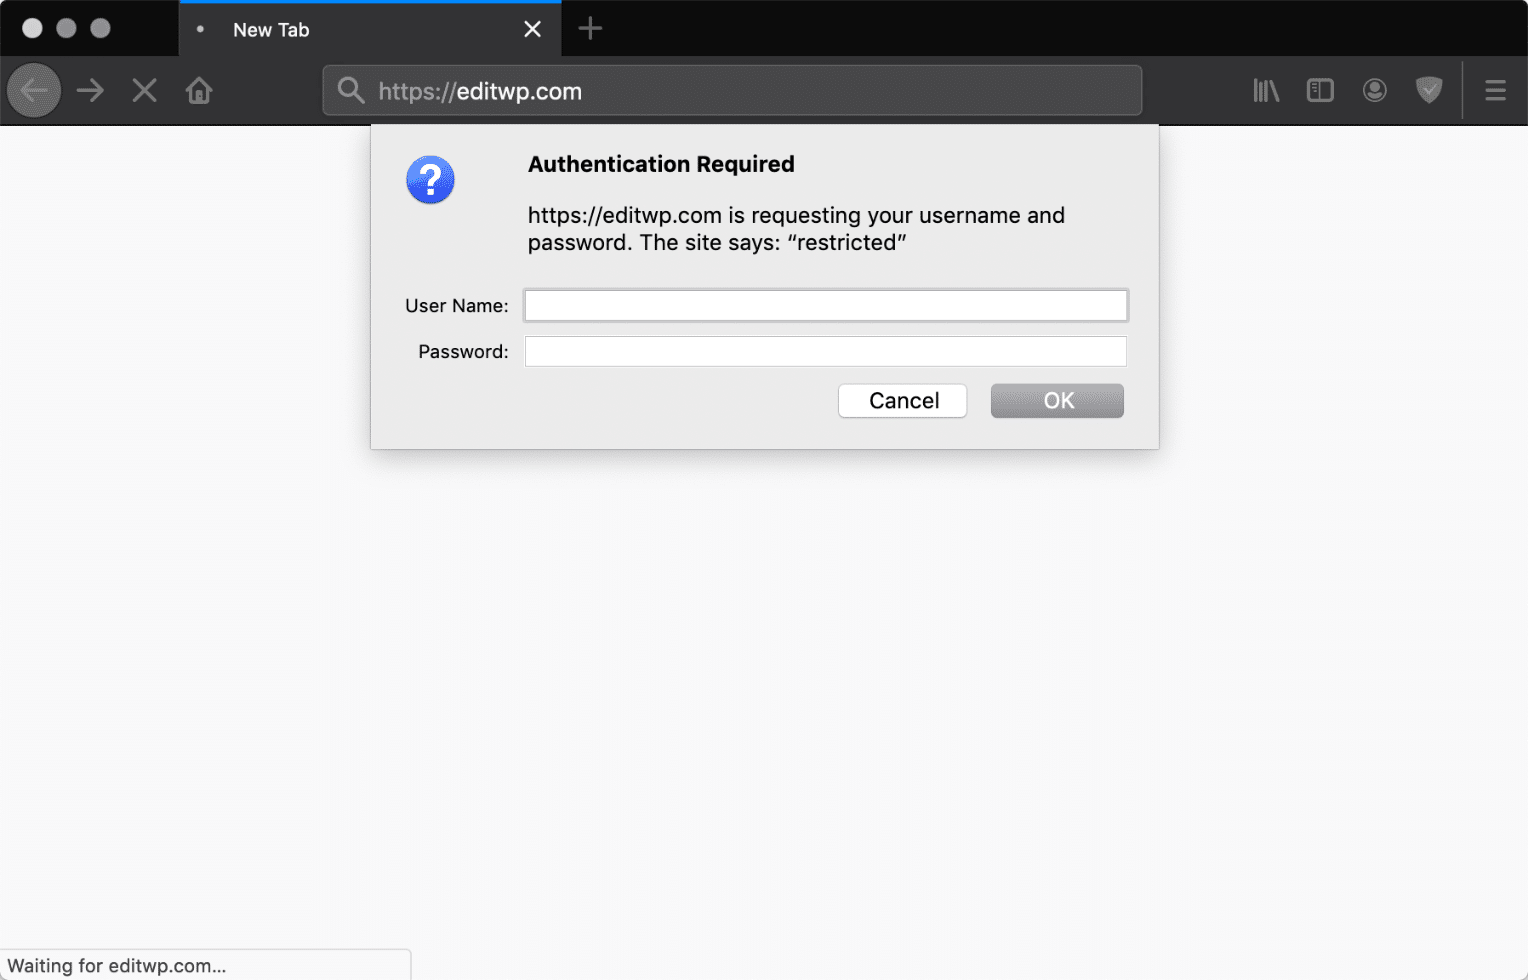 Firefoxの「Authentication Required」プロンプト